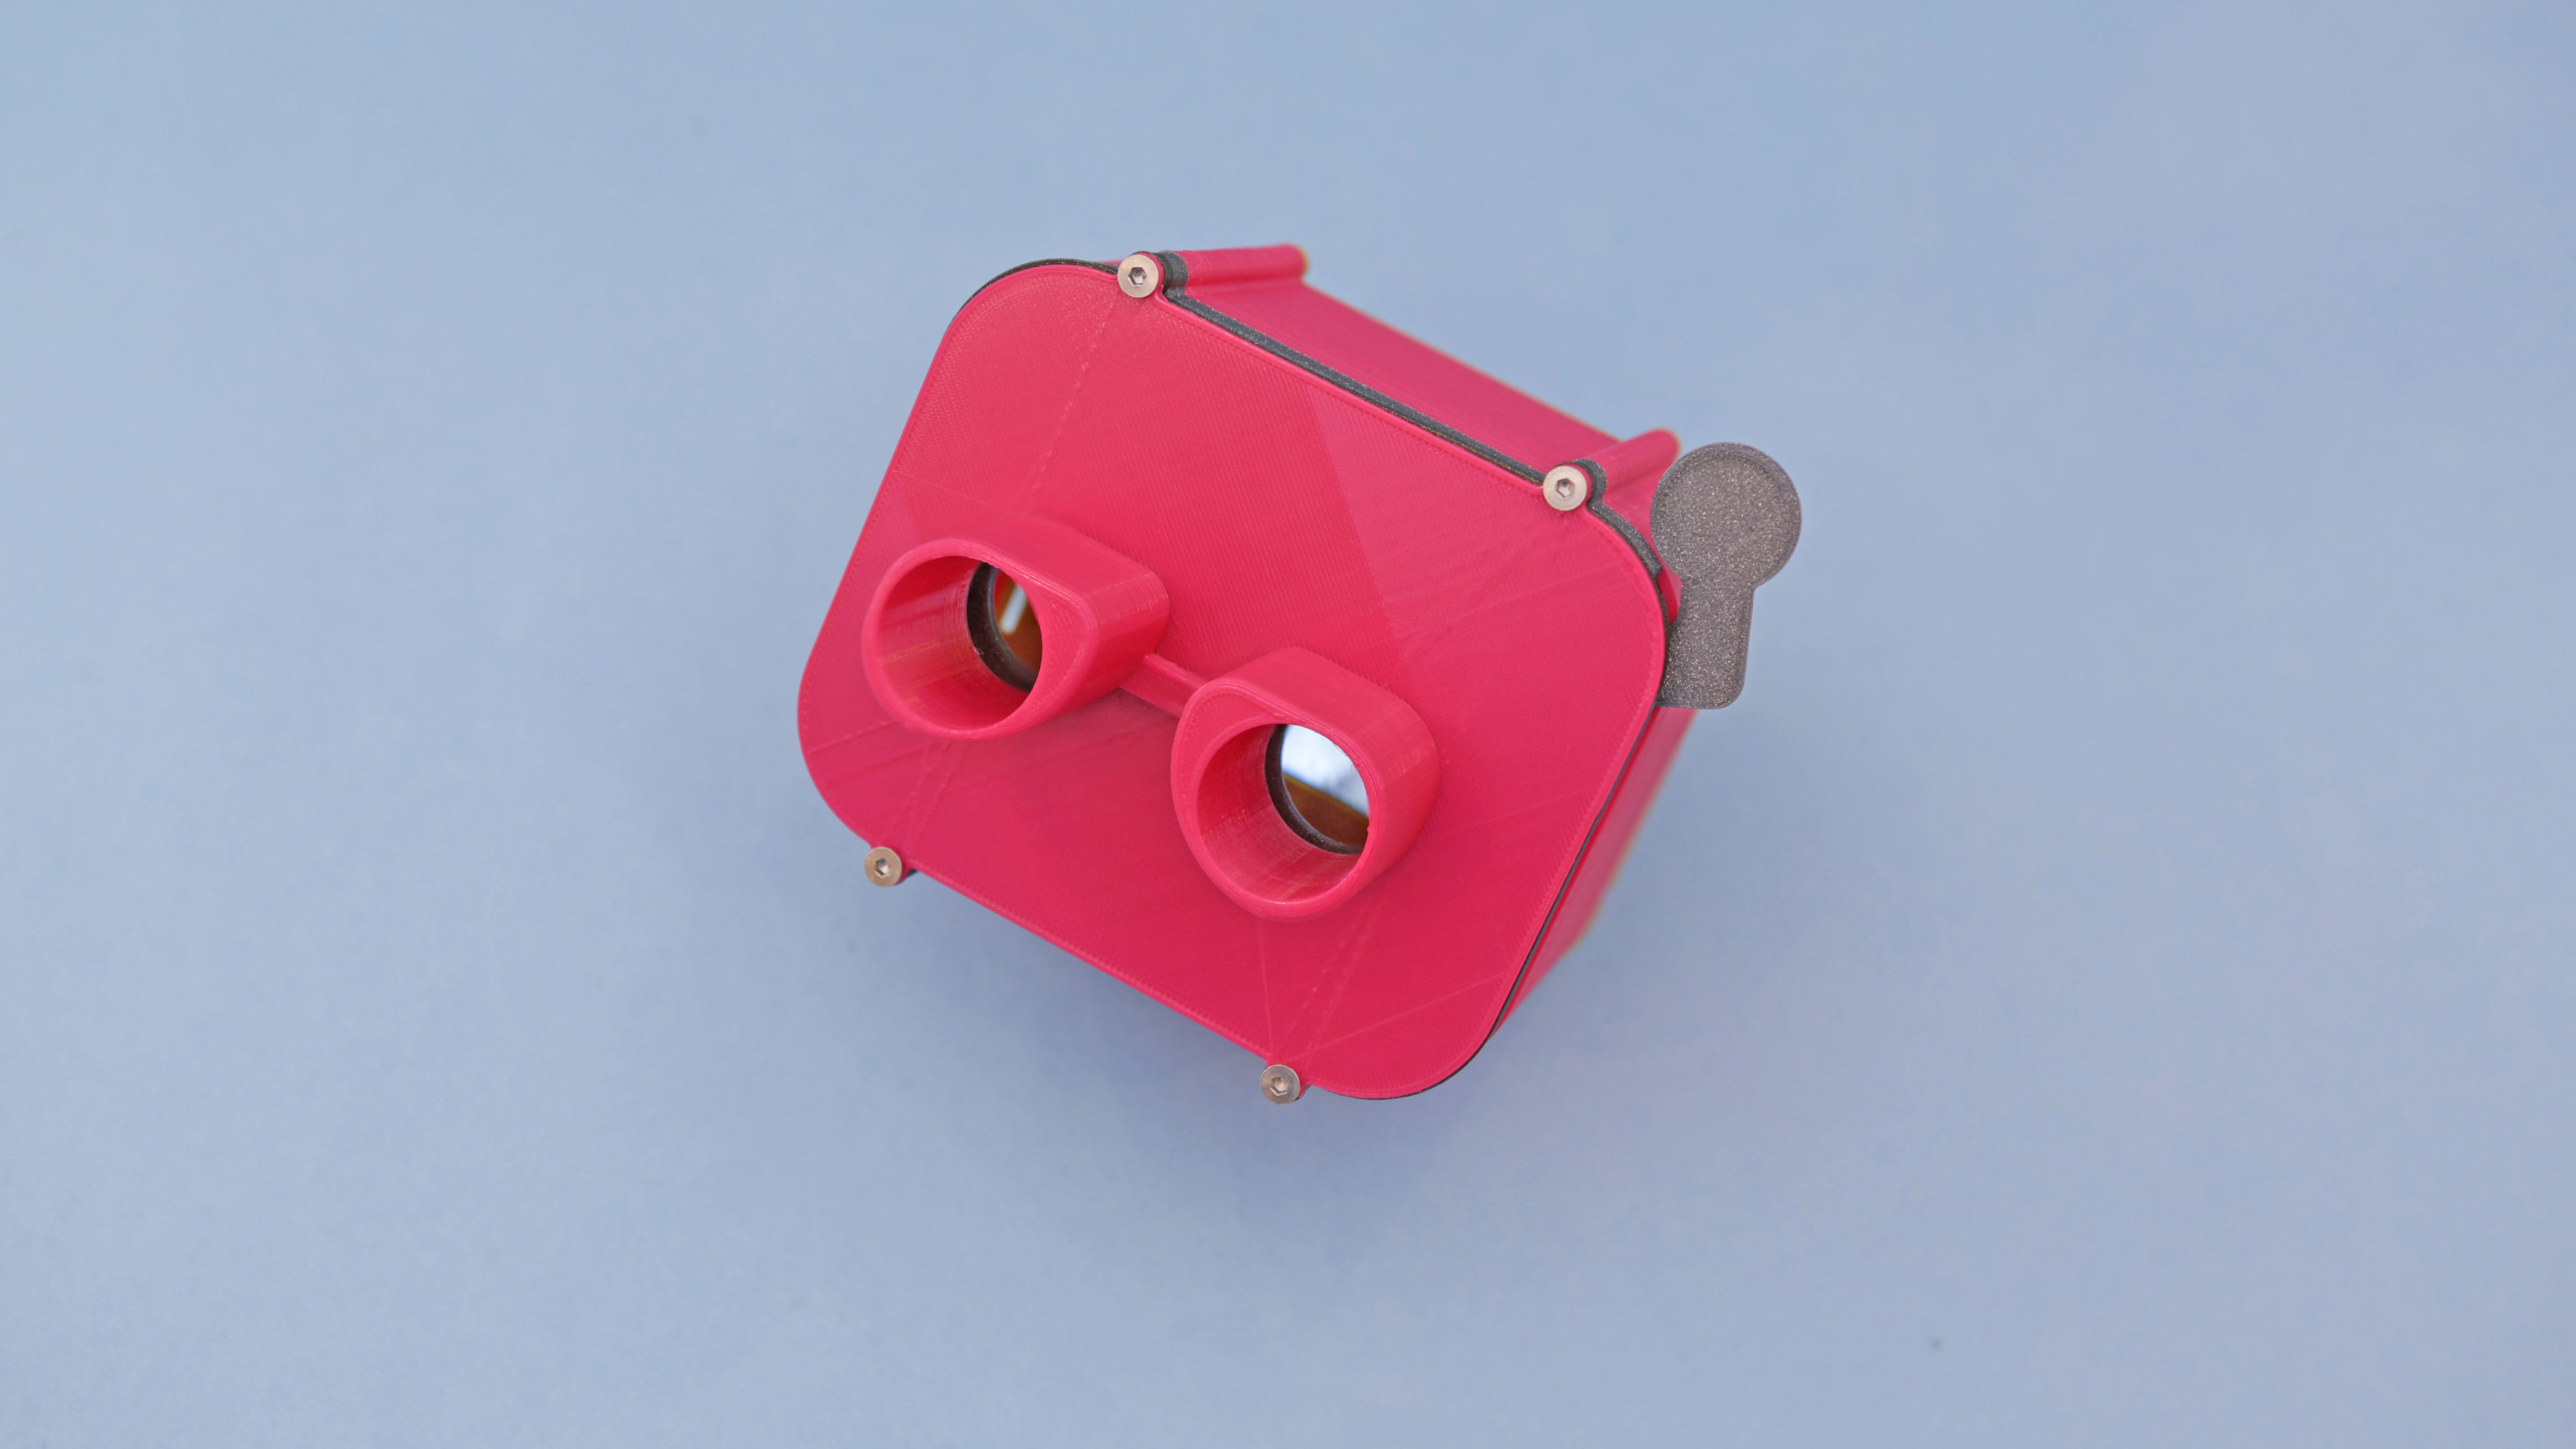 View Master 3d Model